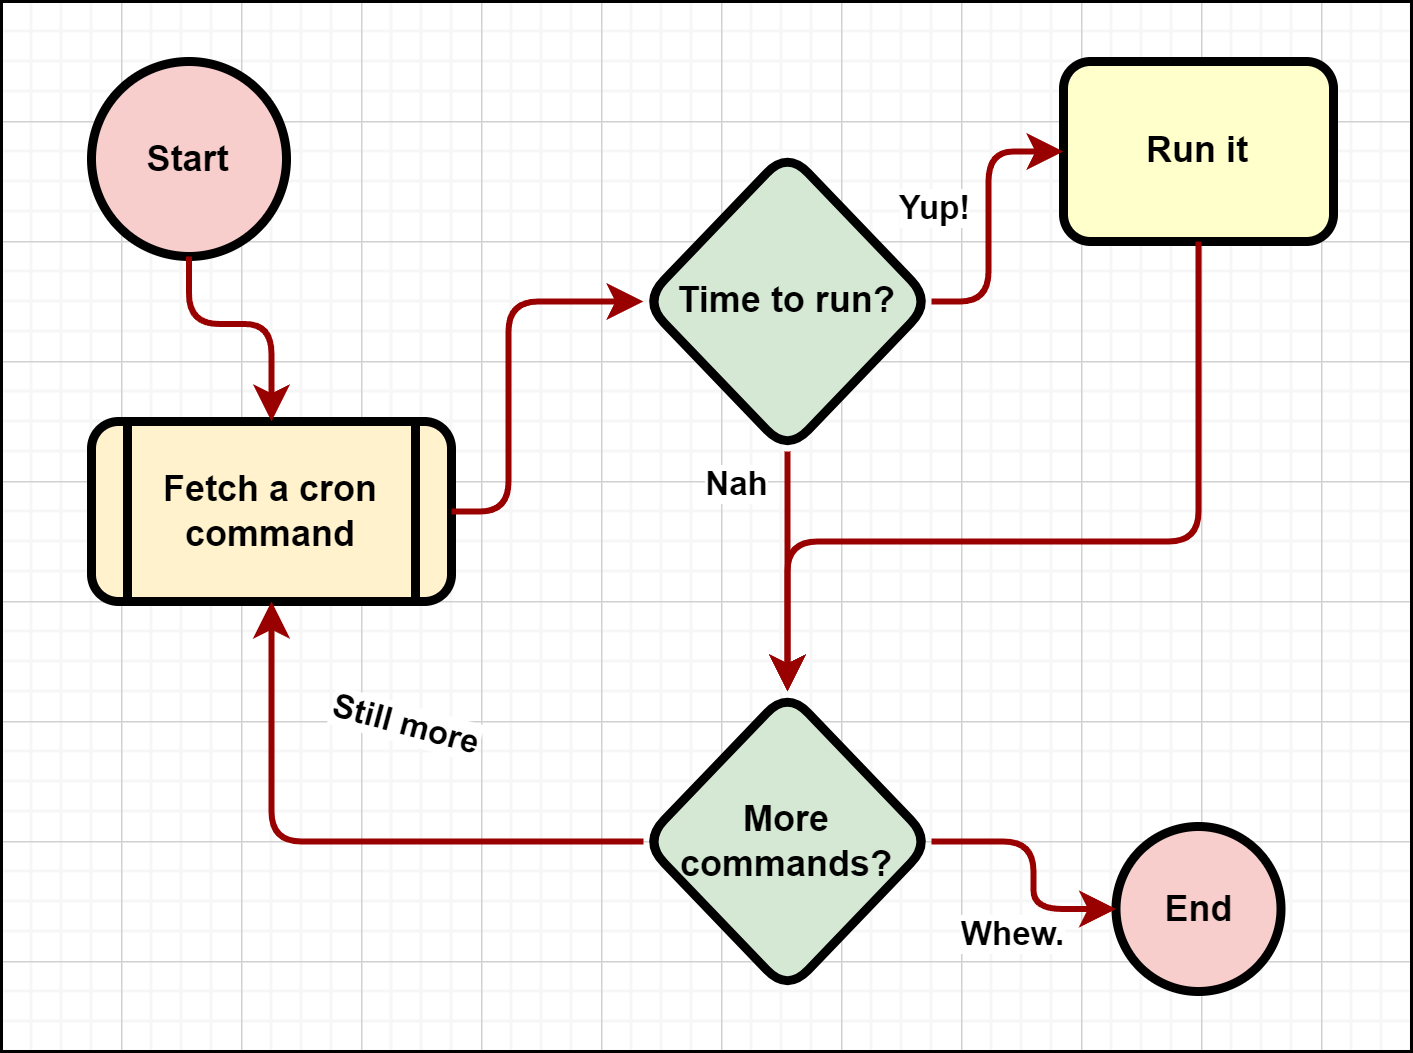 Inaccurate flowchart showing cron operation